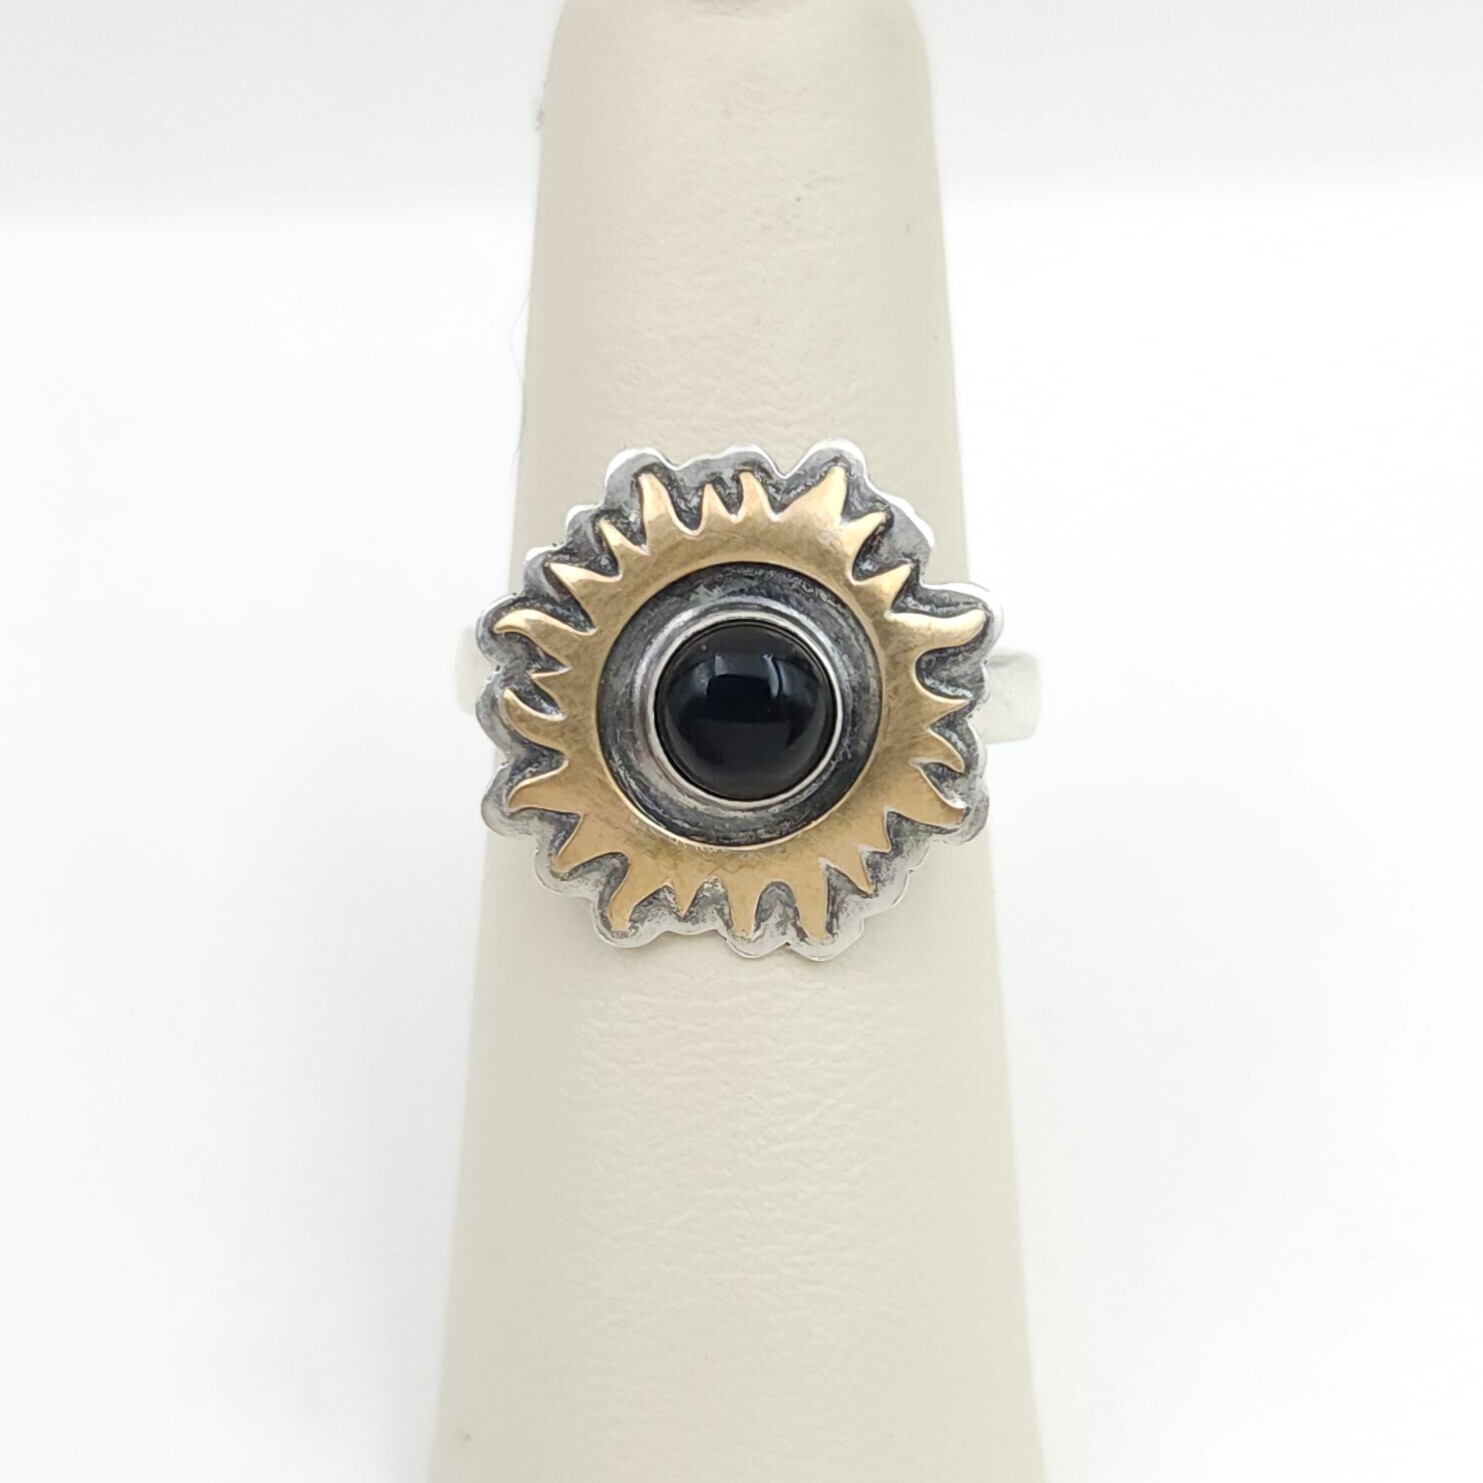 Eclipse Ring with Black Onyx Cabochon and Bronze Sun